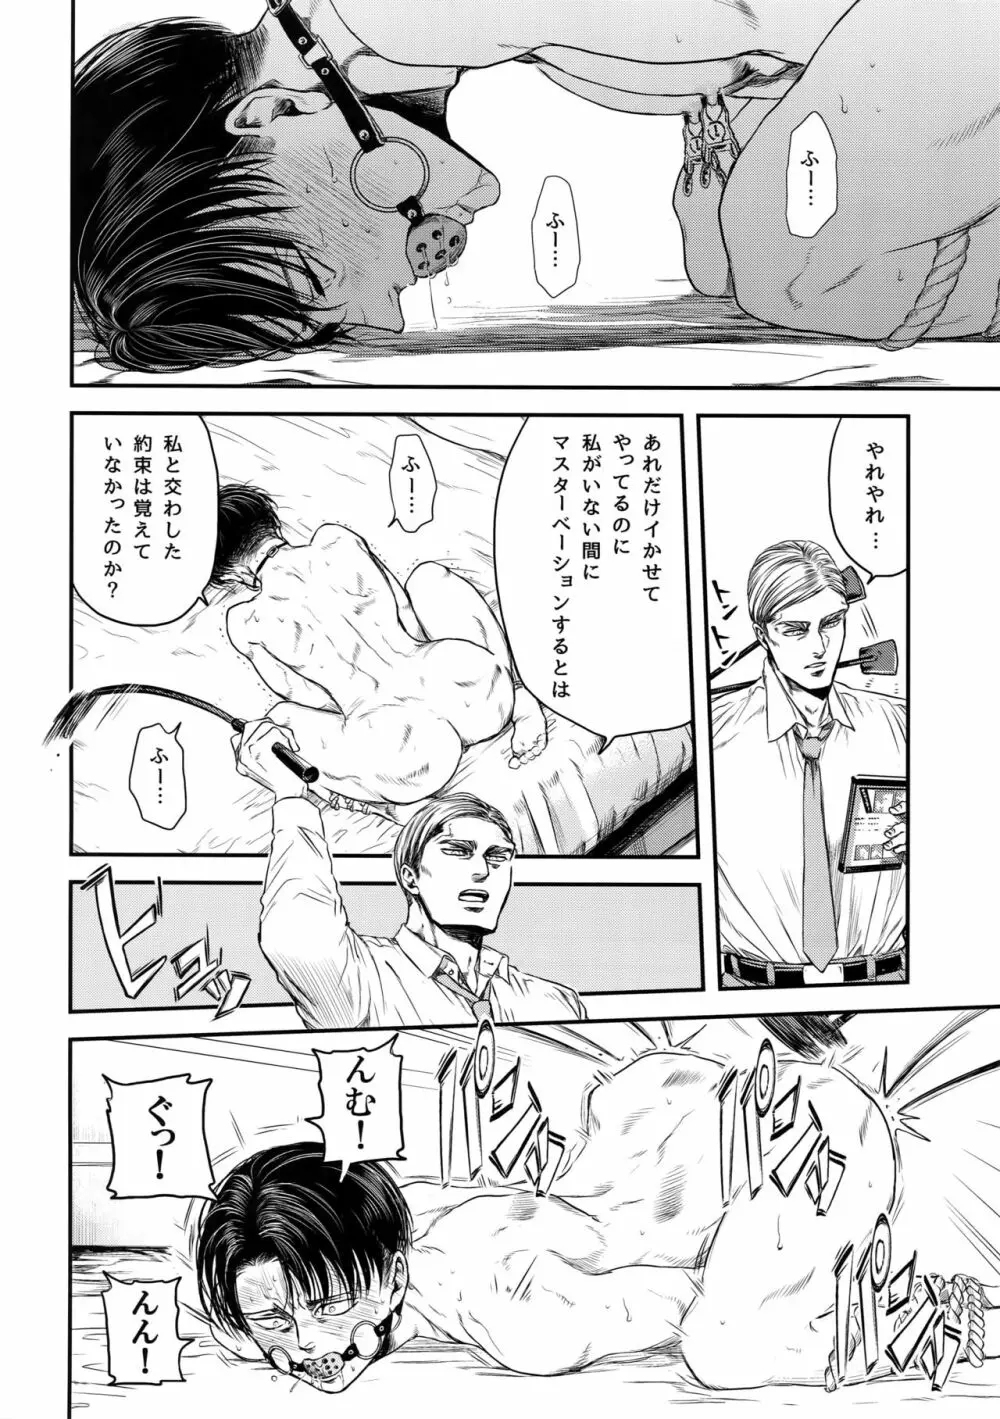 A Page.93